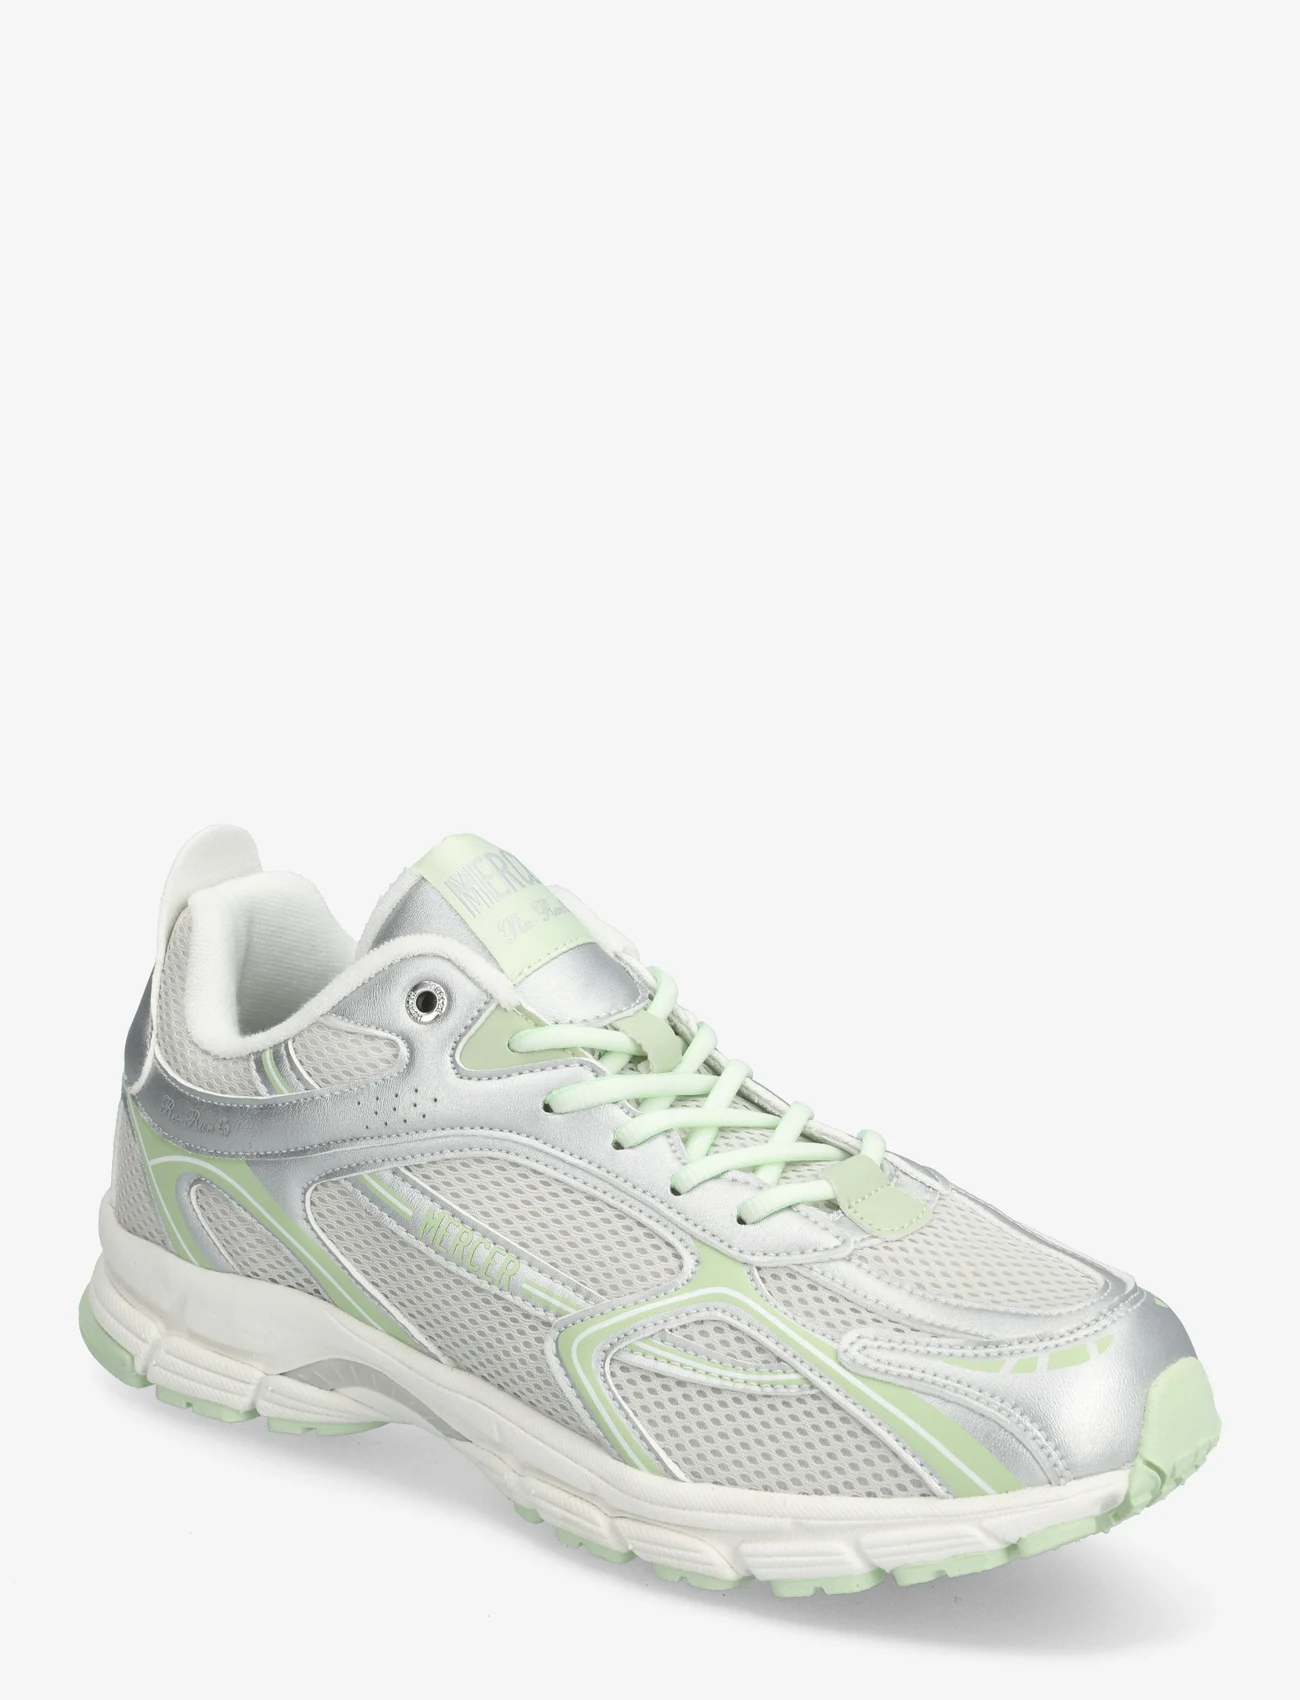 Mercer Amsterdam - The Re-Run Speed - low tops - green/silver - 0